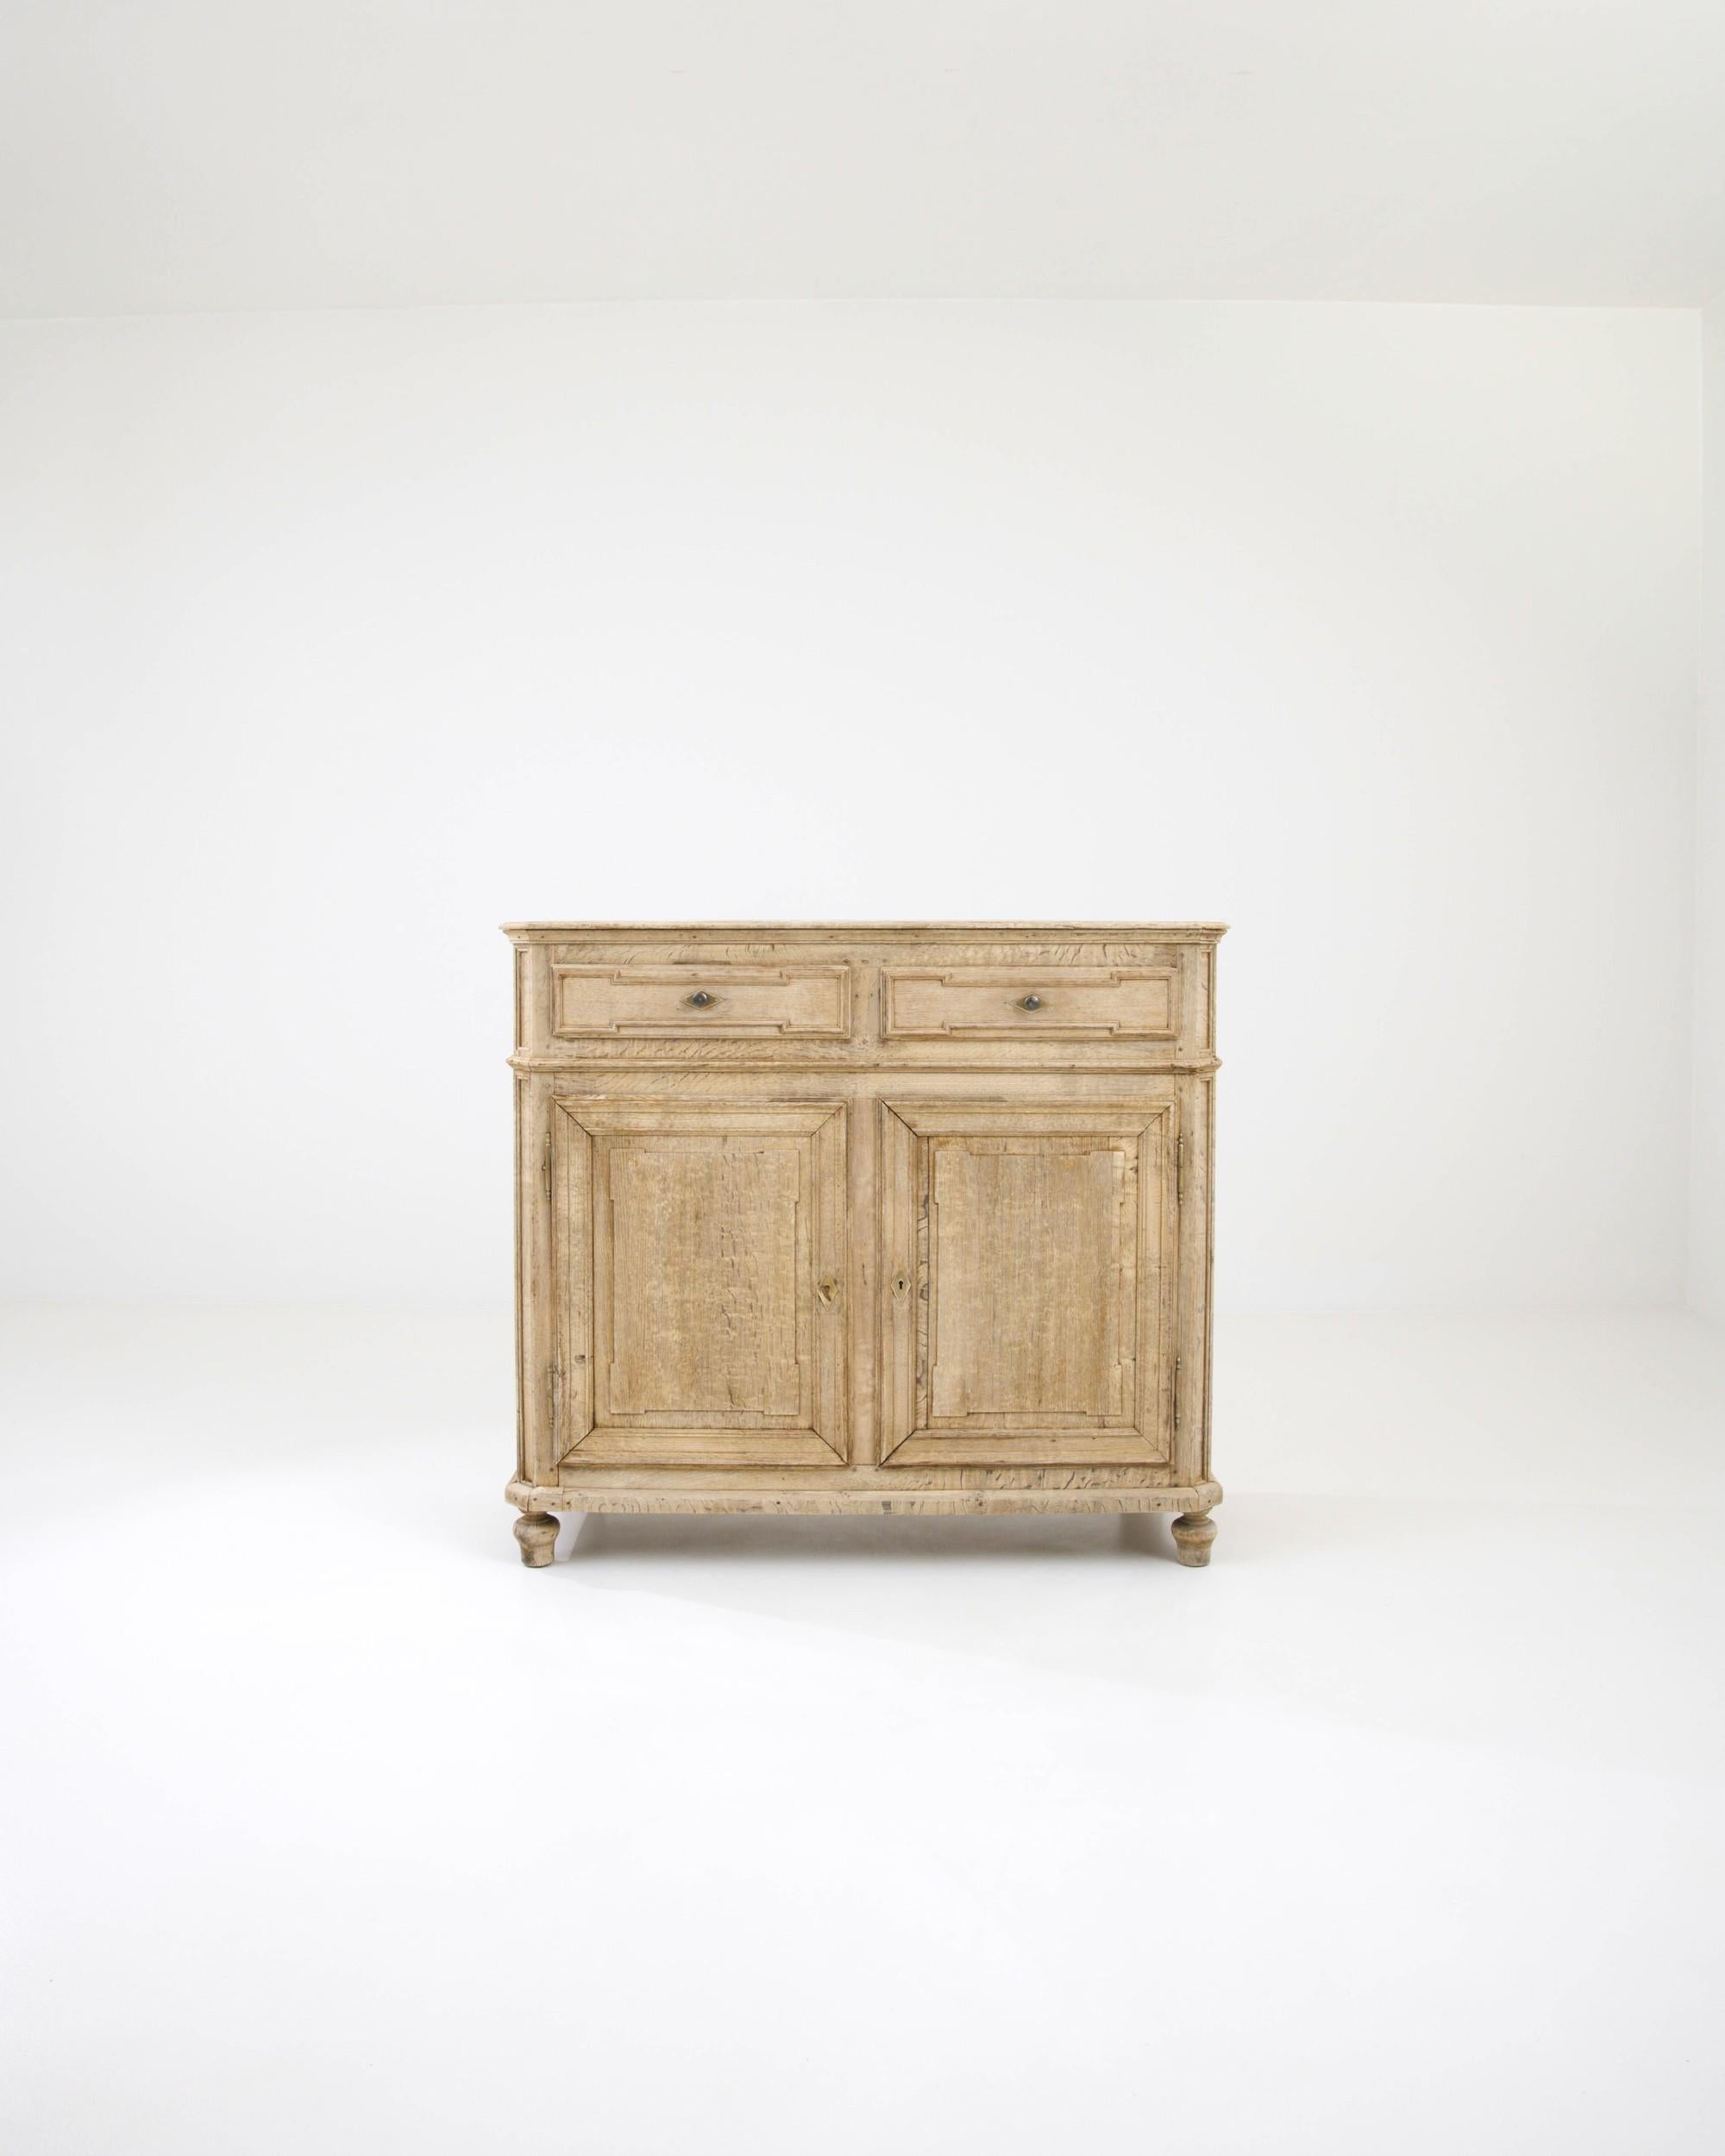 This oak buffet was handcrafted in France in the 19th century. The linear carvings adorning the set of drawers and two panel doors stylishly juxtapose the organic materiality of the oak, creating a balanced composition. The minimalist handles and